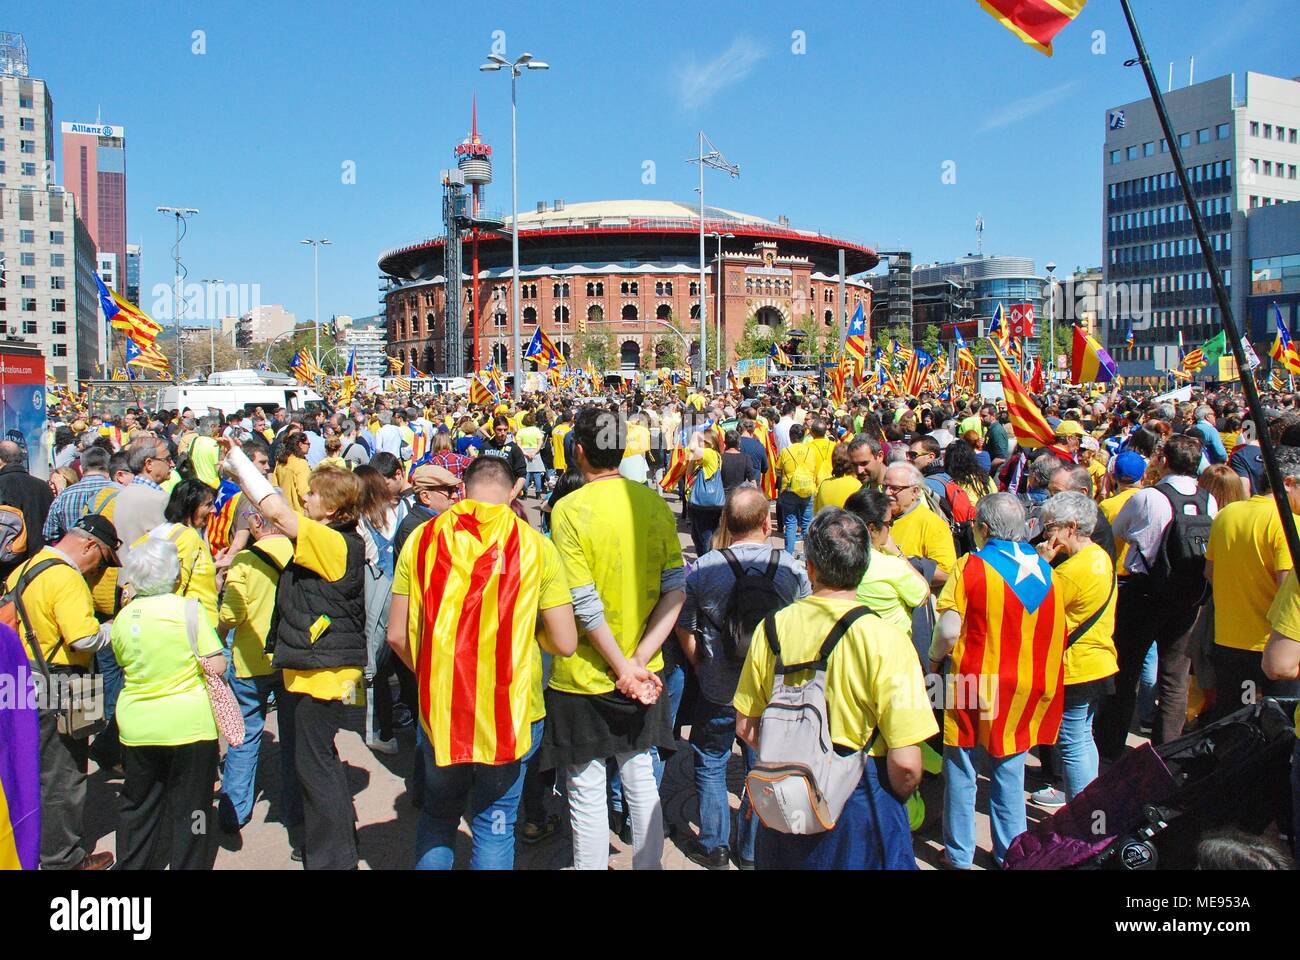 Catalans take part in the Llibertat Presos Politics march in support of jailed politicians at Placa Espanya in Barcelona, Spain on April 15, 2018. Stock Photo